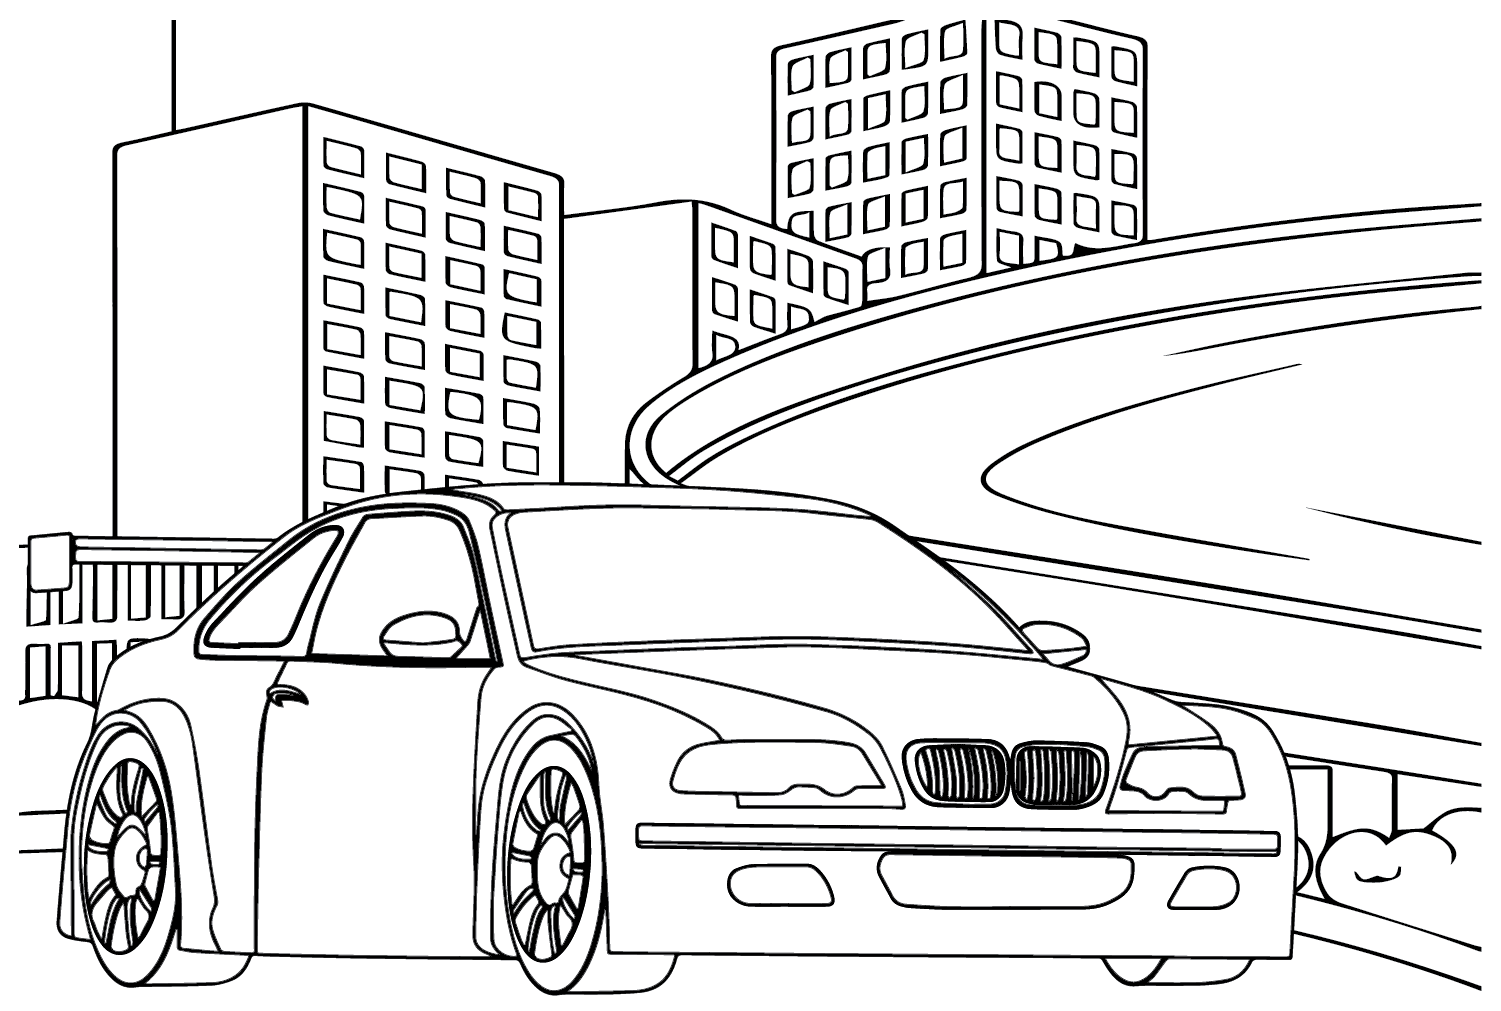 BMW Race Car Coloring Page from BMW